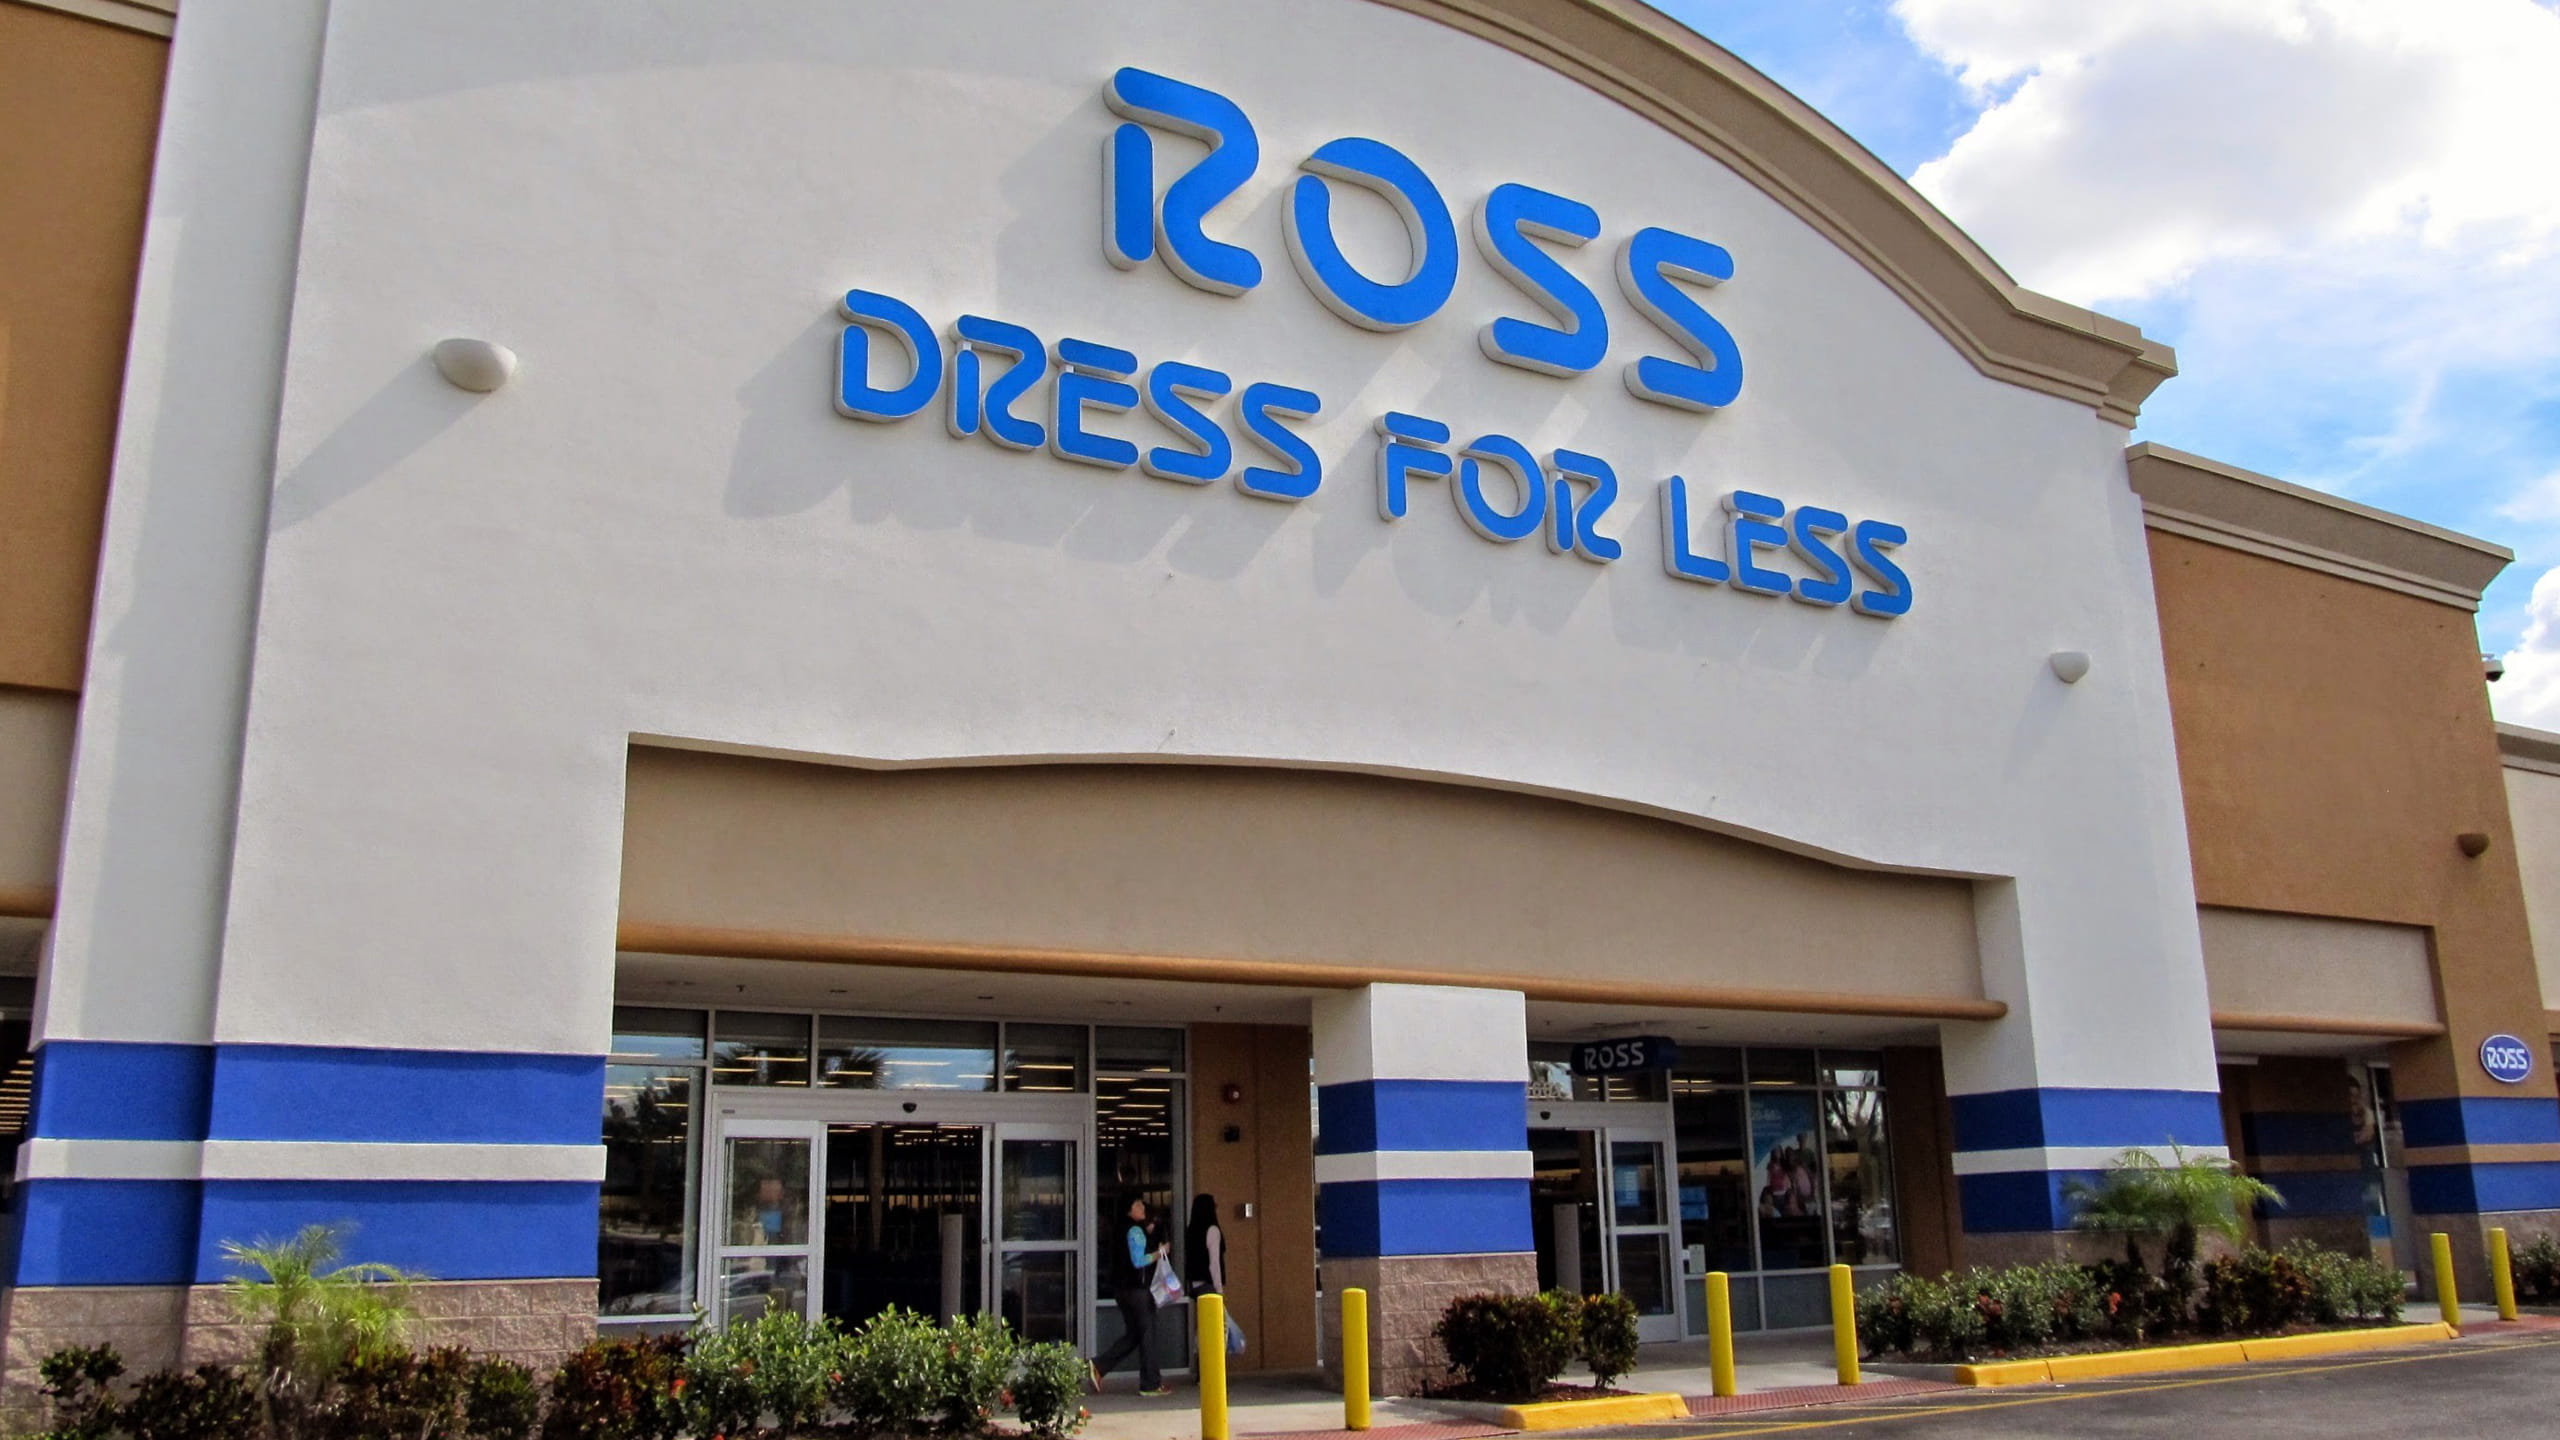 American retailer Ross Stores opens 30 new stores, aims to open 100